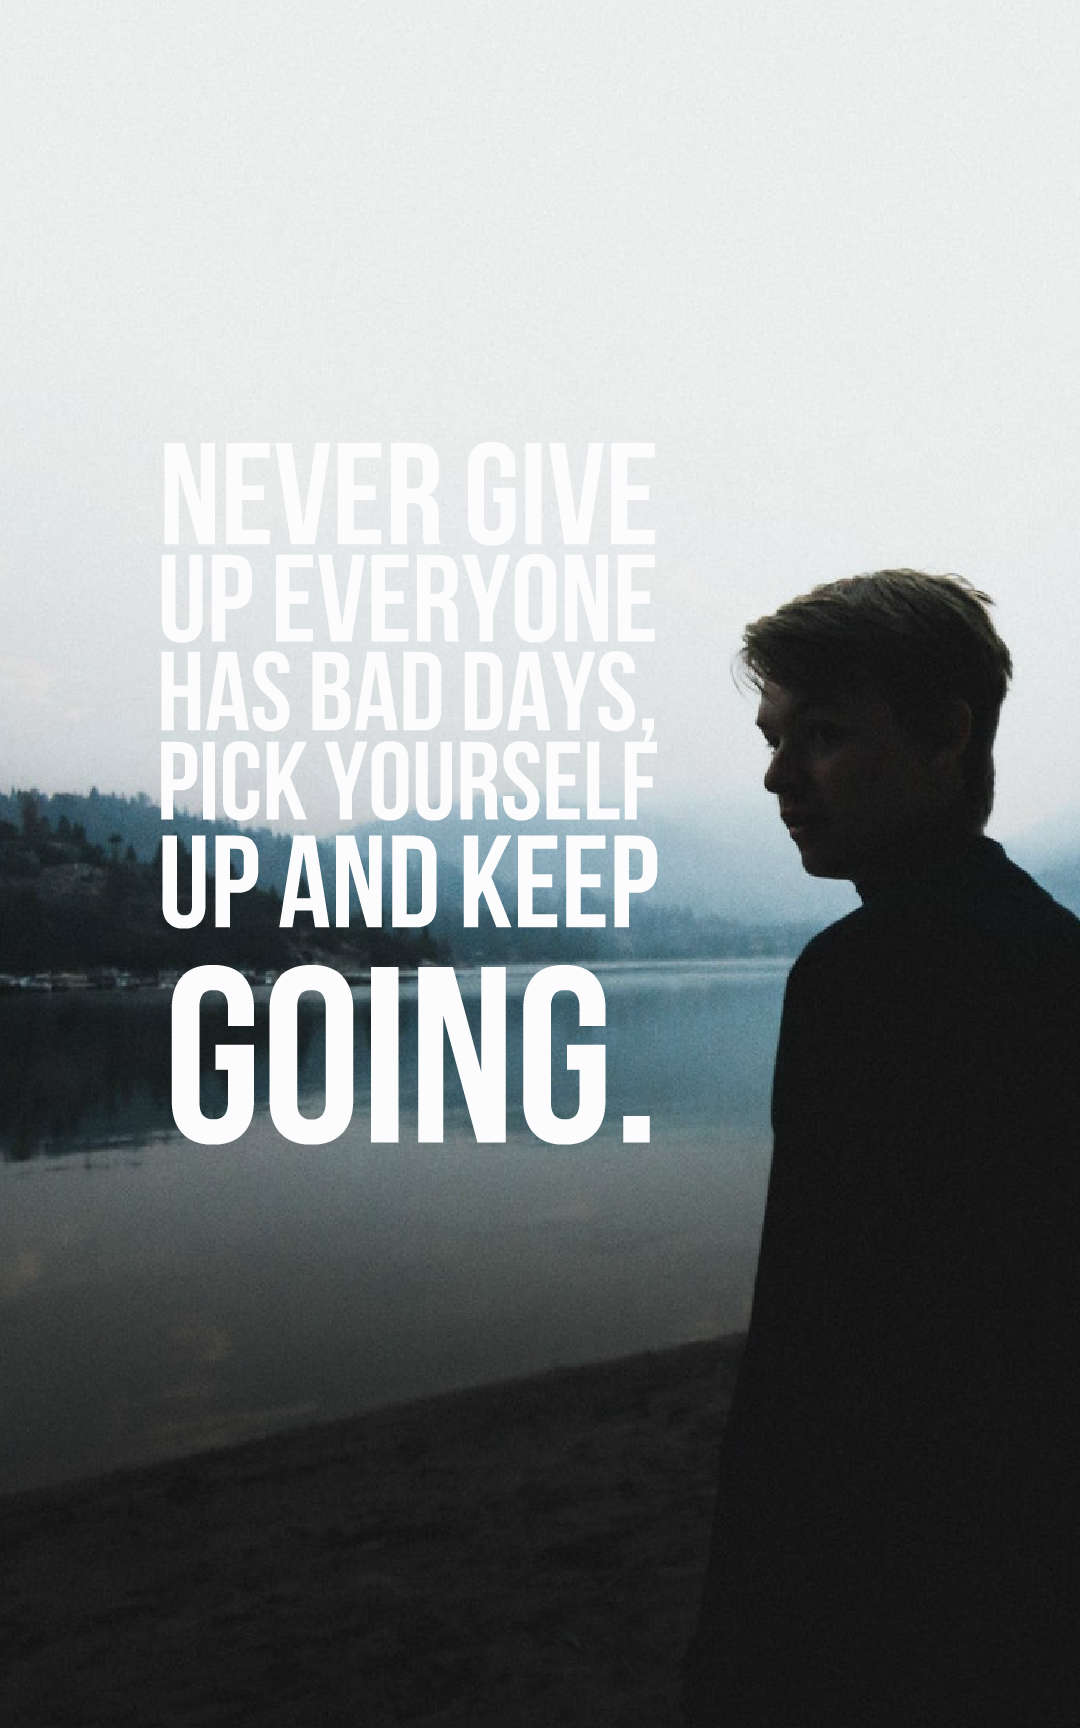 Never give up everyone has bad days, pick yourself up and keep going.